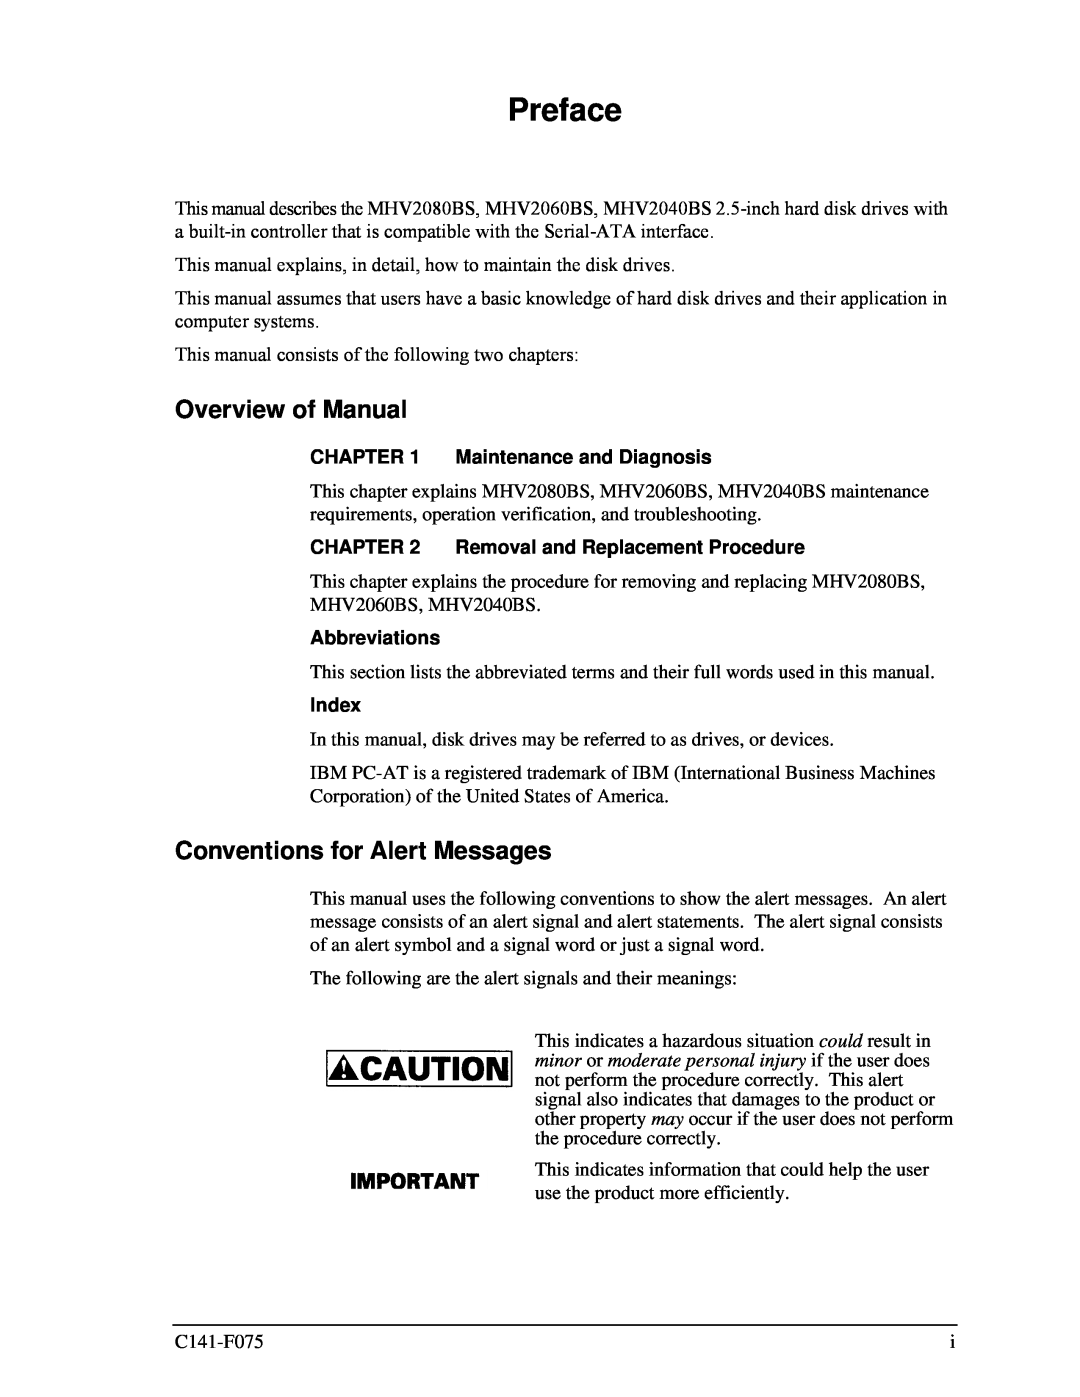 Fujitsu MHV2040BS Preface, Overview of Manual, Conventions for Alert Messages, Maintenance and Diagnosis, Abbreviations 